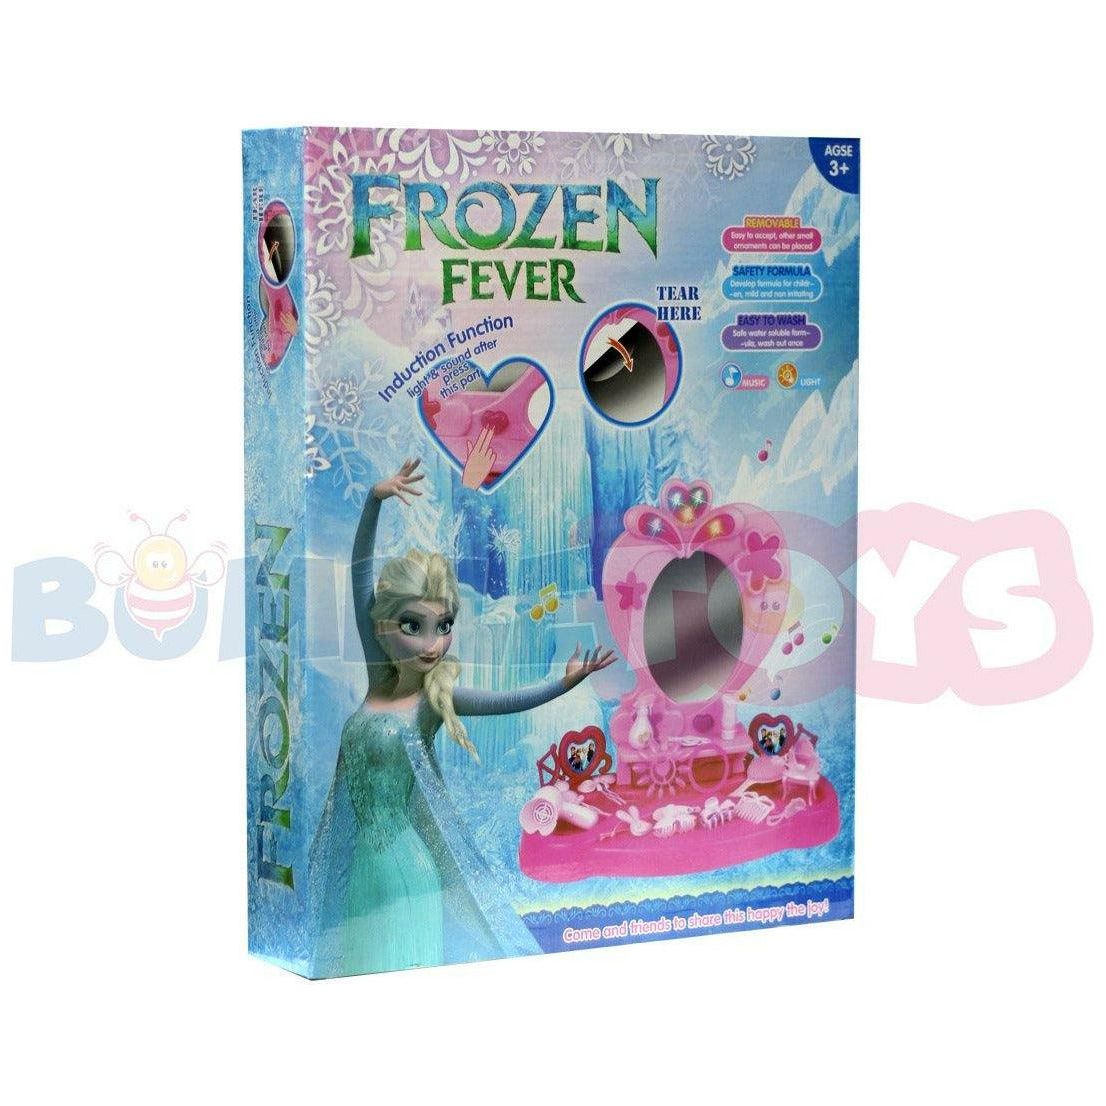 Frozen Fever Dresser Table Play Set For Girls - BumbleToys - 5-7 Years, Boys, Frozen, Girls, Roleplay, Toy House